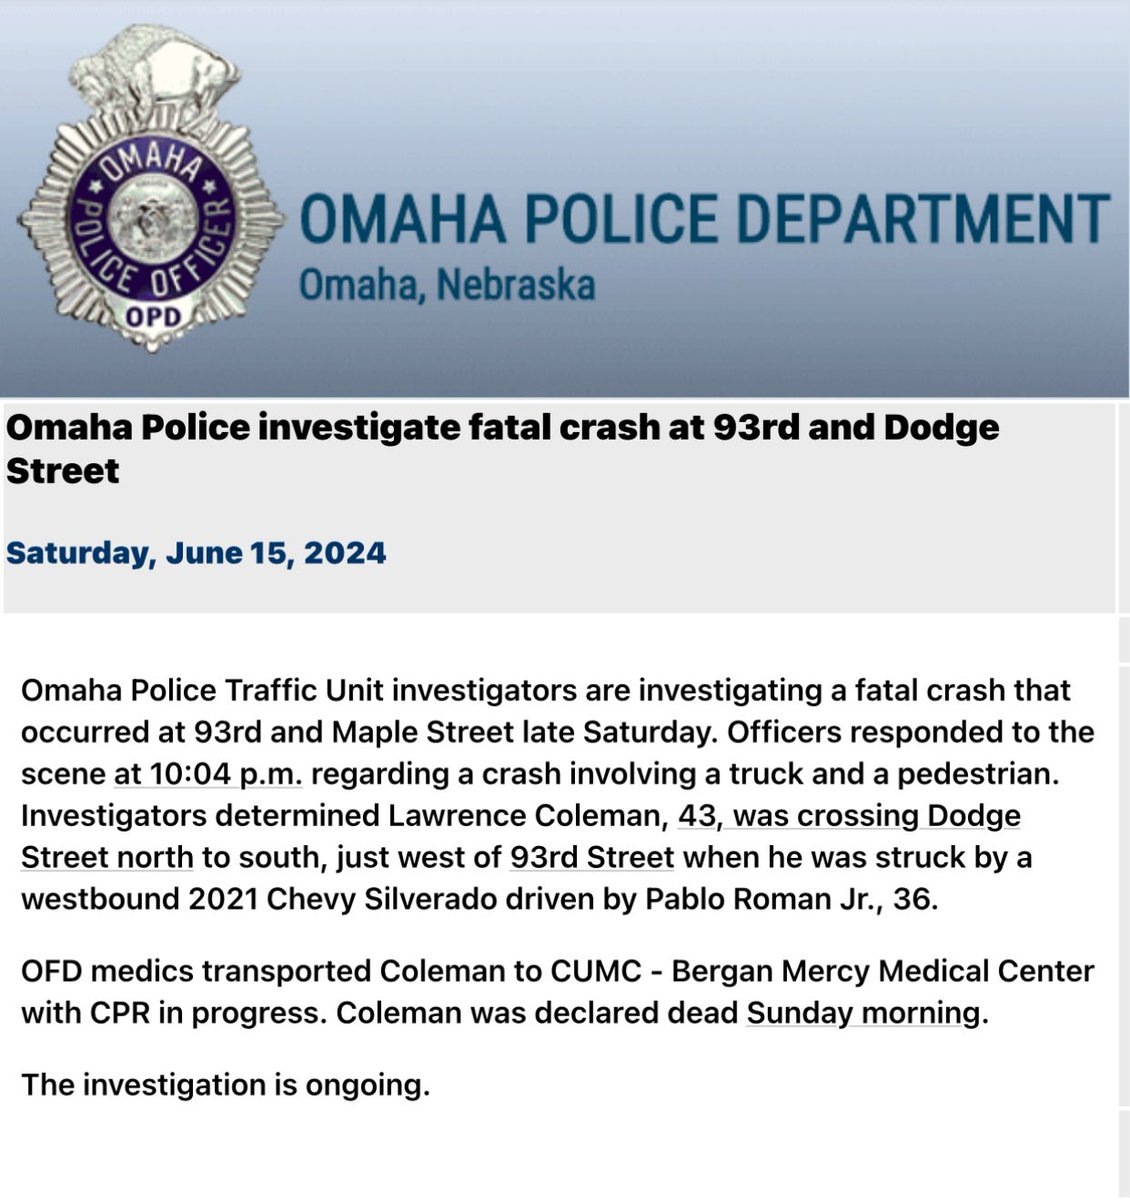 @OmahaPolice investigating a fatal crash near 93rd and Dodge Street. Lawrence Coleman, 43, was crossing Dodge Street when Pablo Roman, Jr hit Coleman. Coleman was declared deceased Sunday morning. The investigation is ongoing.